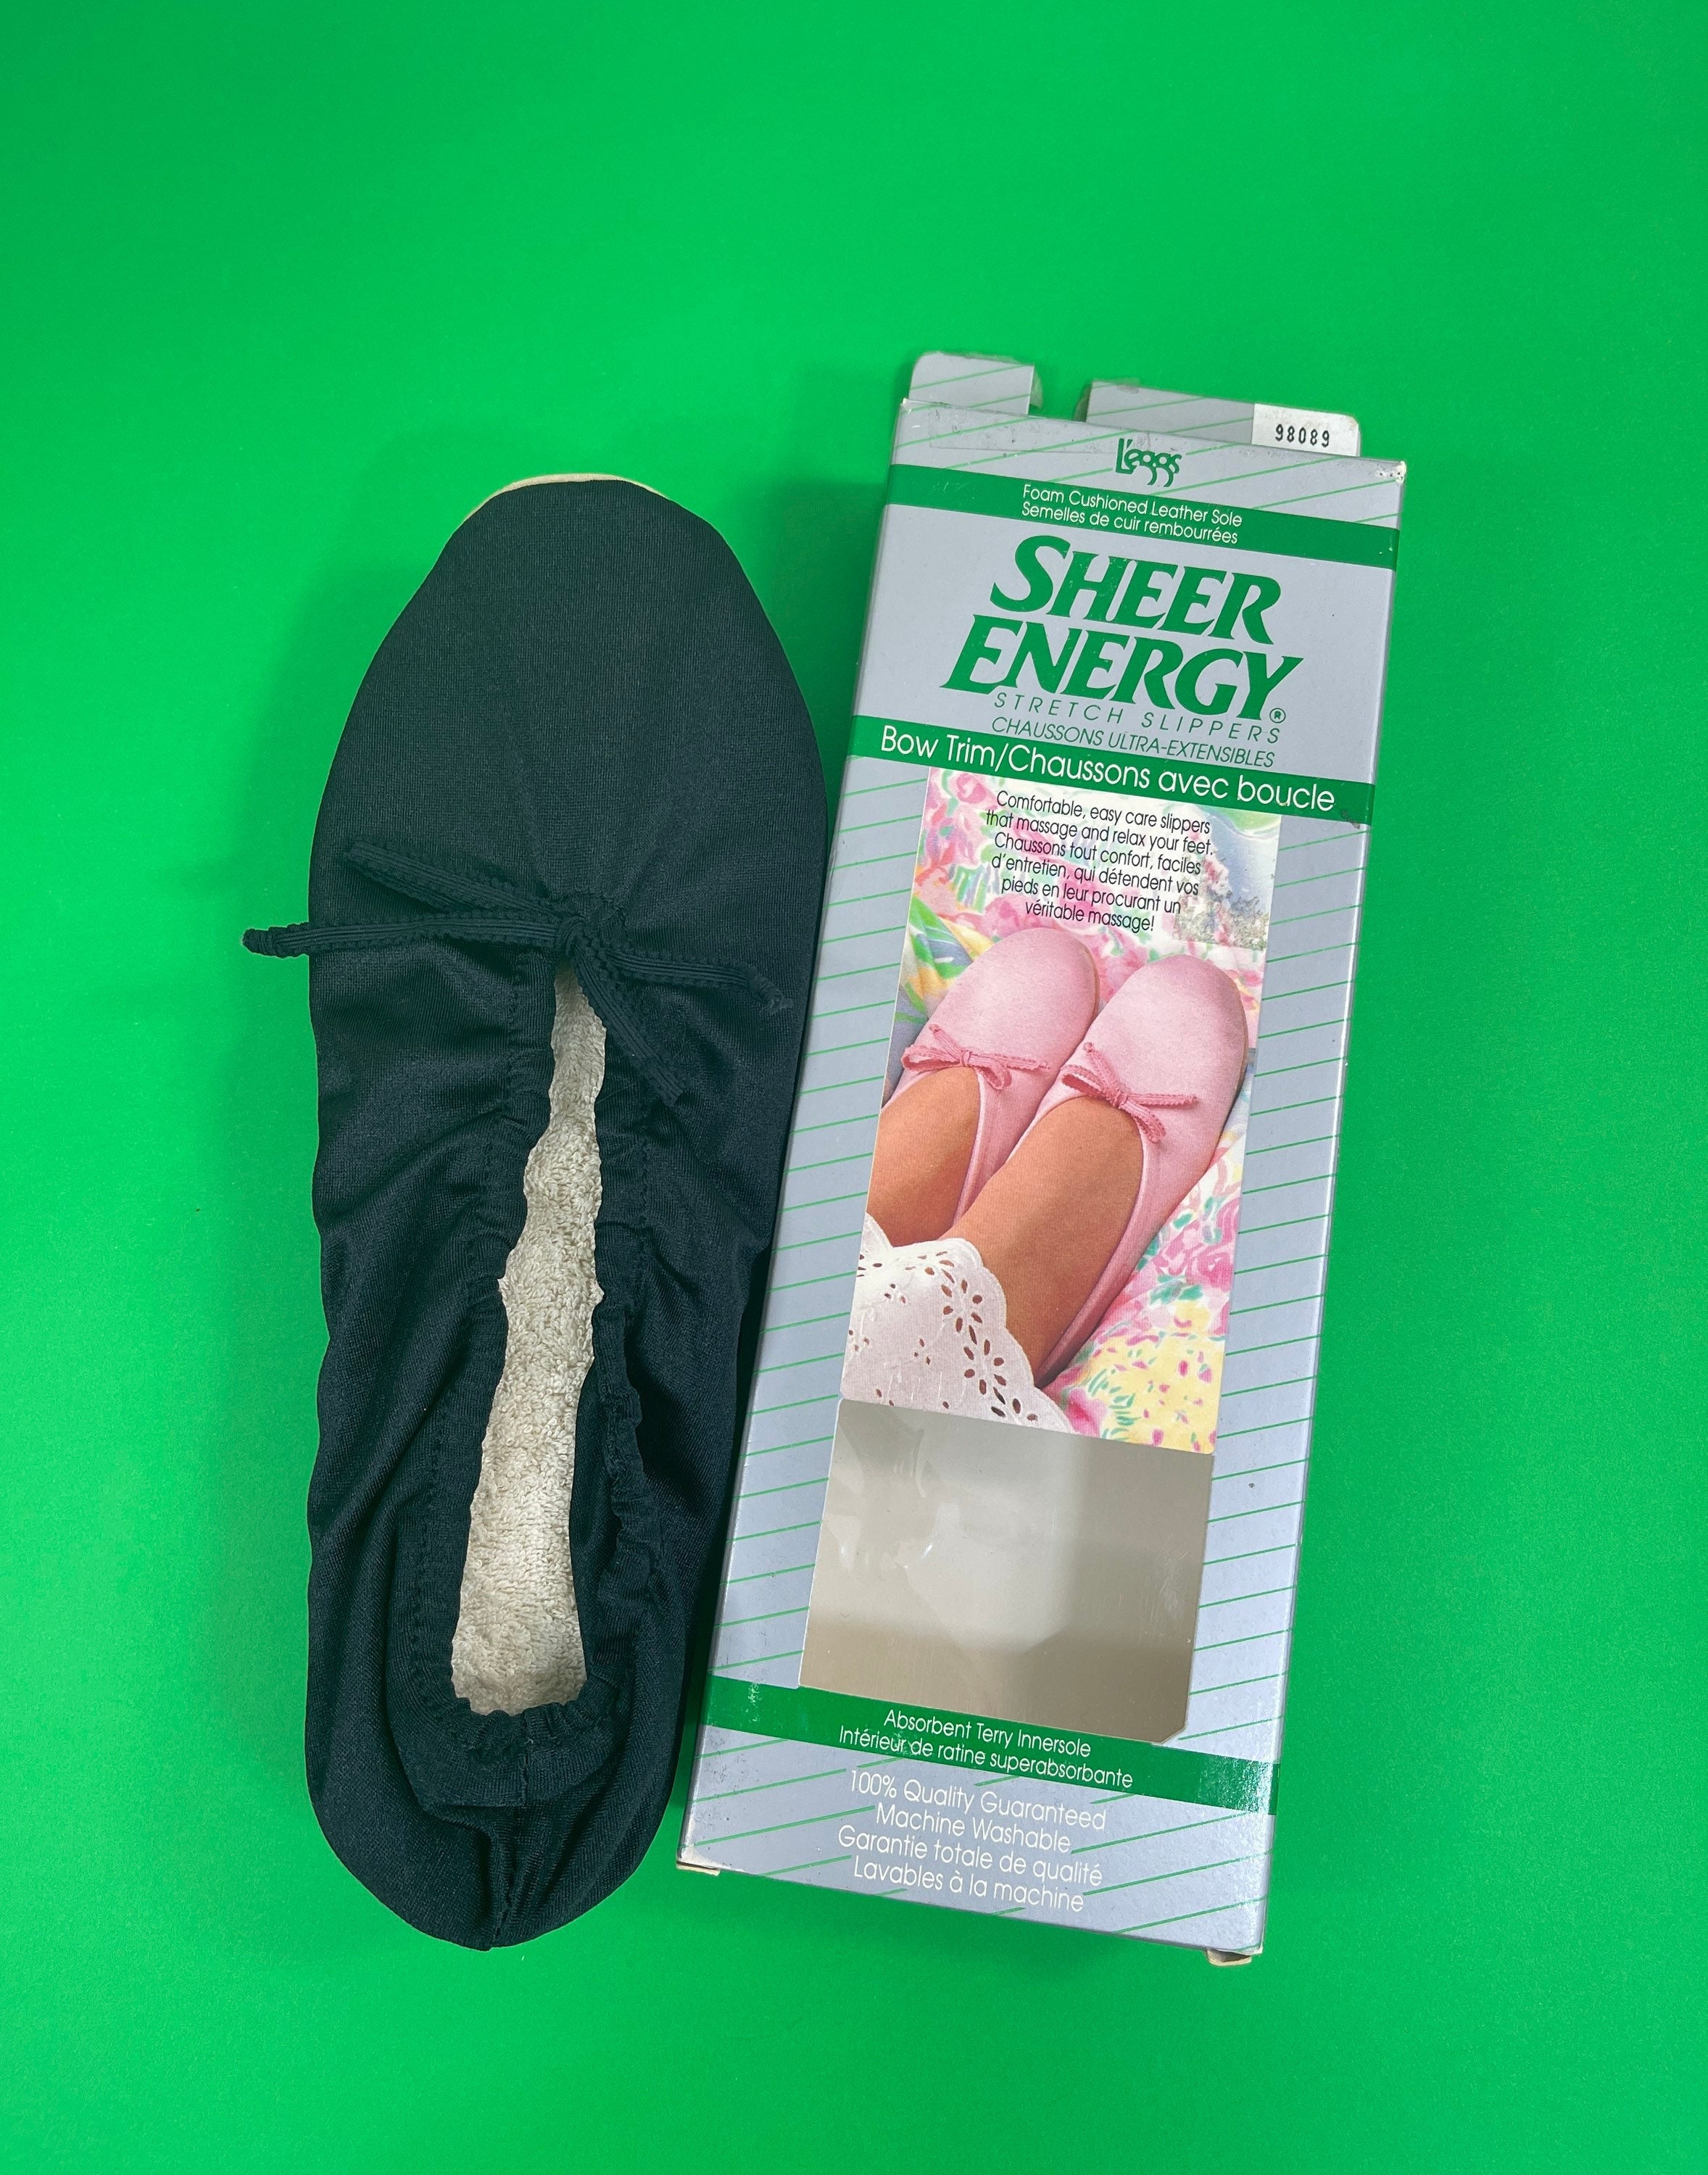 L'eggs Sheer Energy Stretch Slippers / Vintage L'eggs Sheer Energy Stretch  Slippers / Vintage 70's Lightweight Travel Slippers 